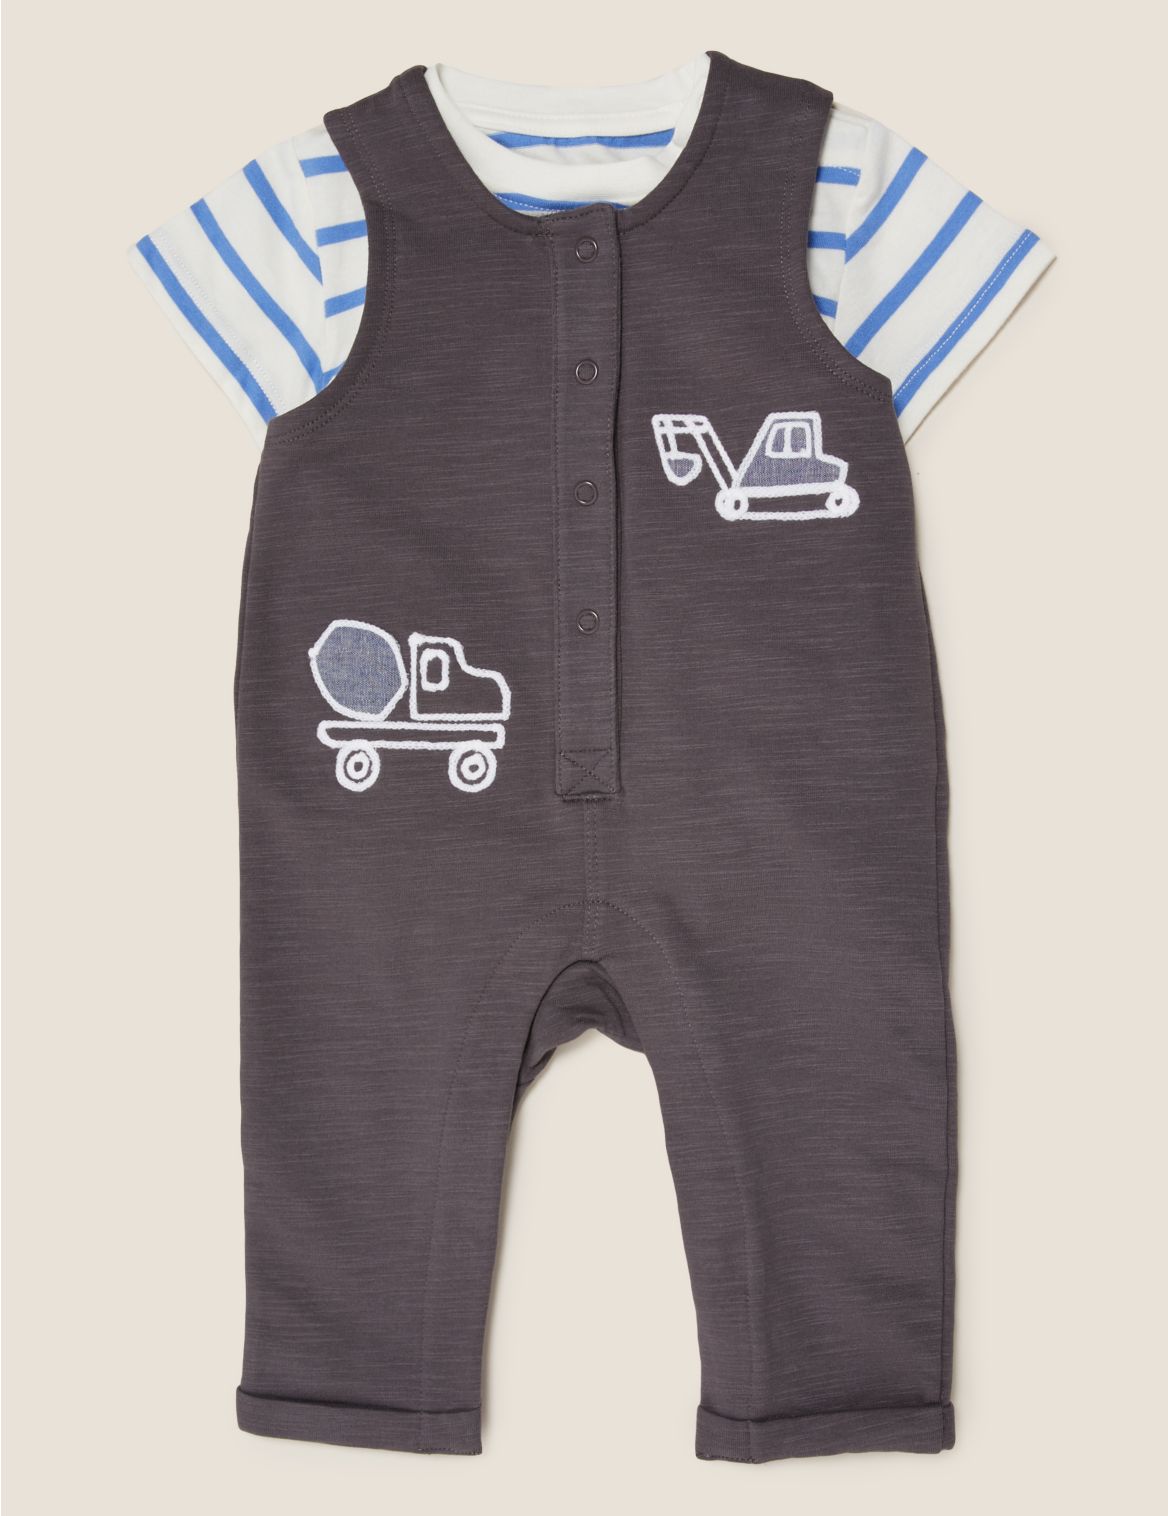 2pc Cotton Transport Dungaree Outfit (7lbs - 12 Mths) grey